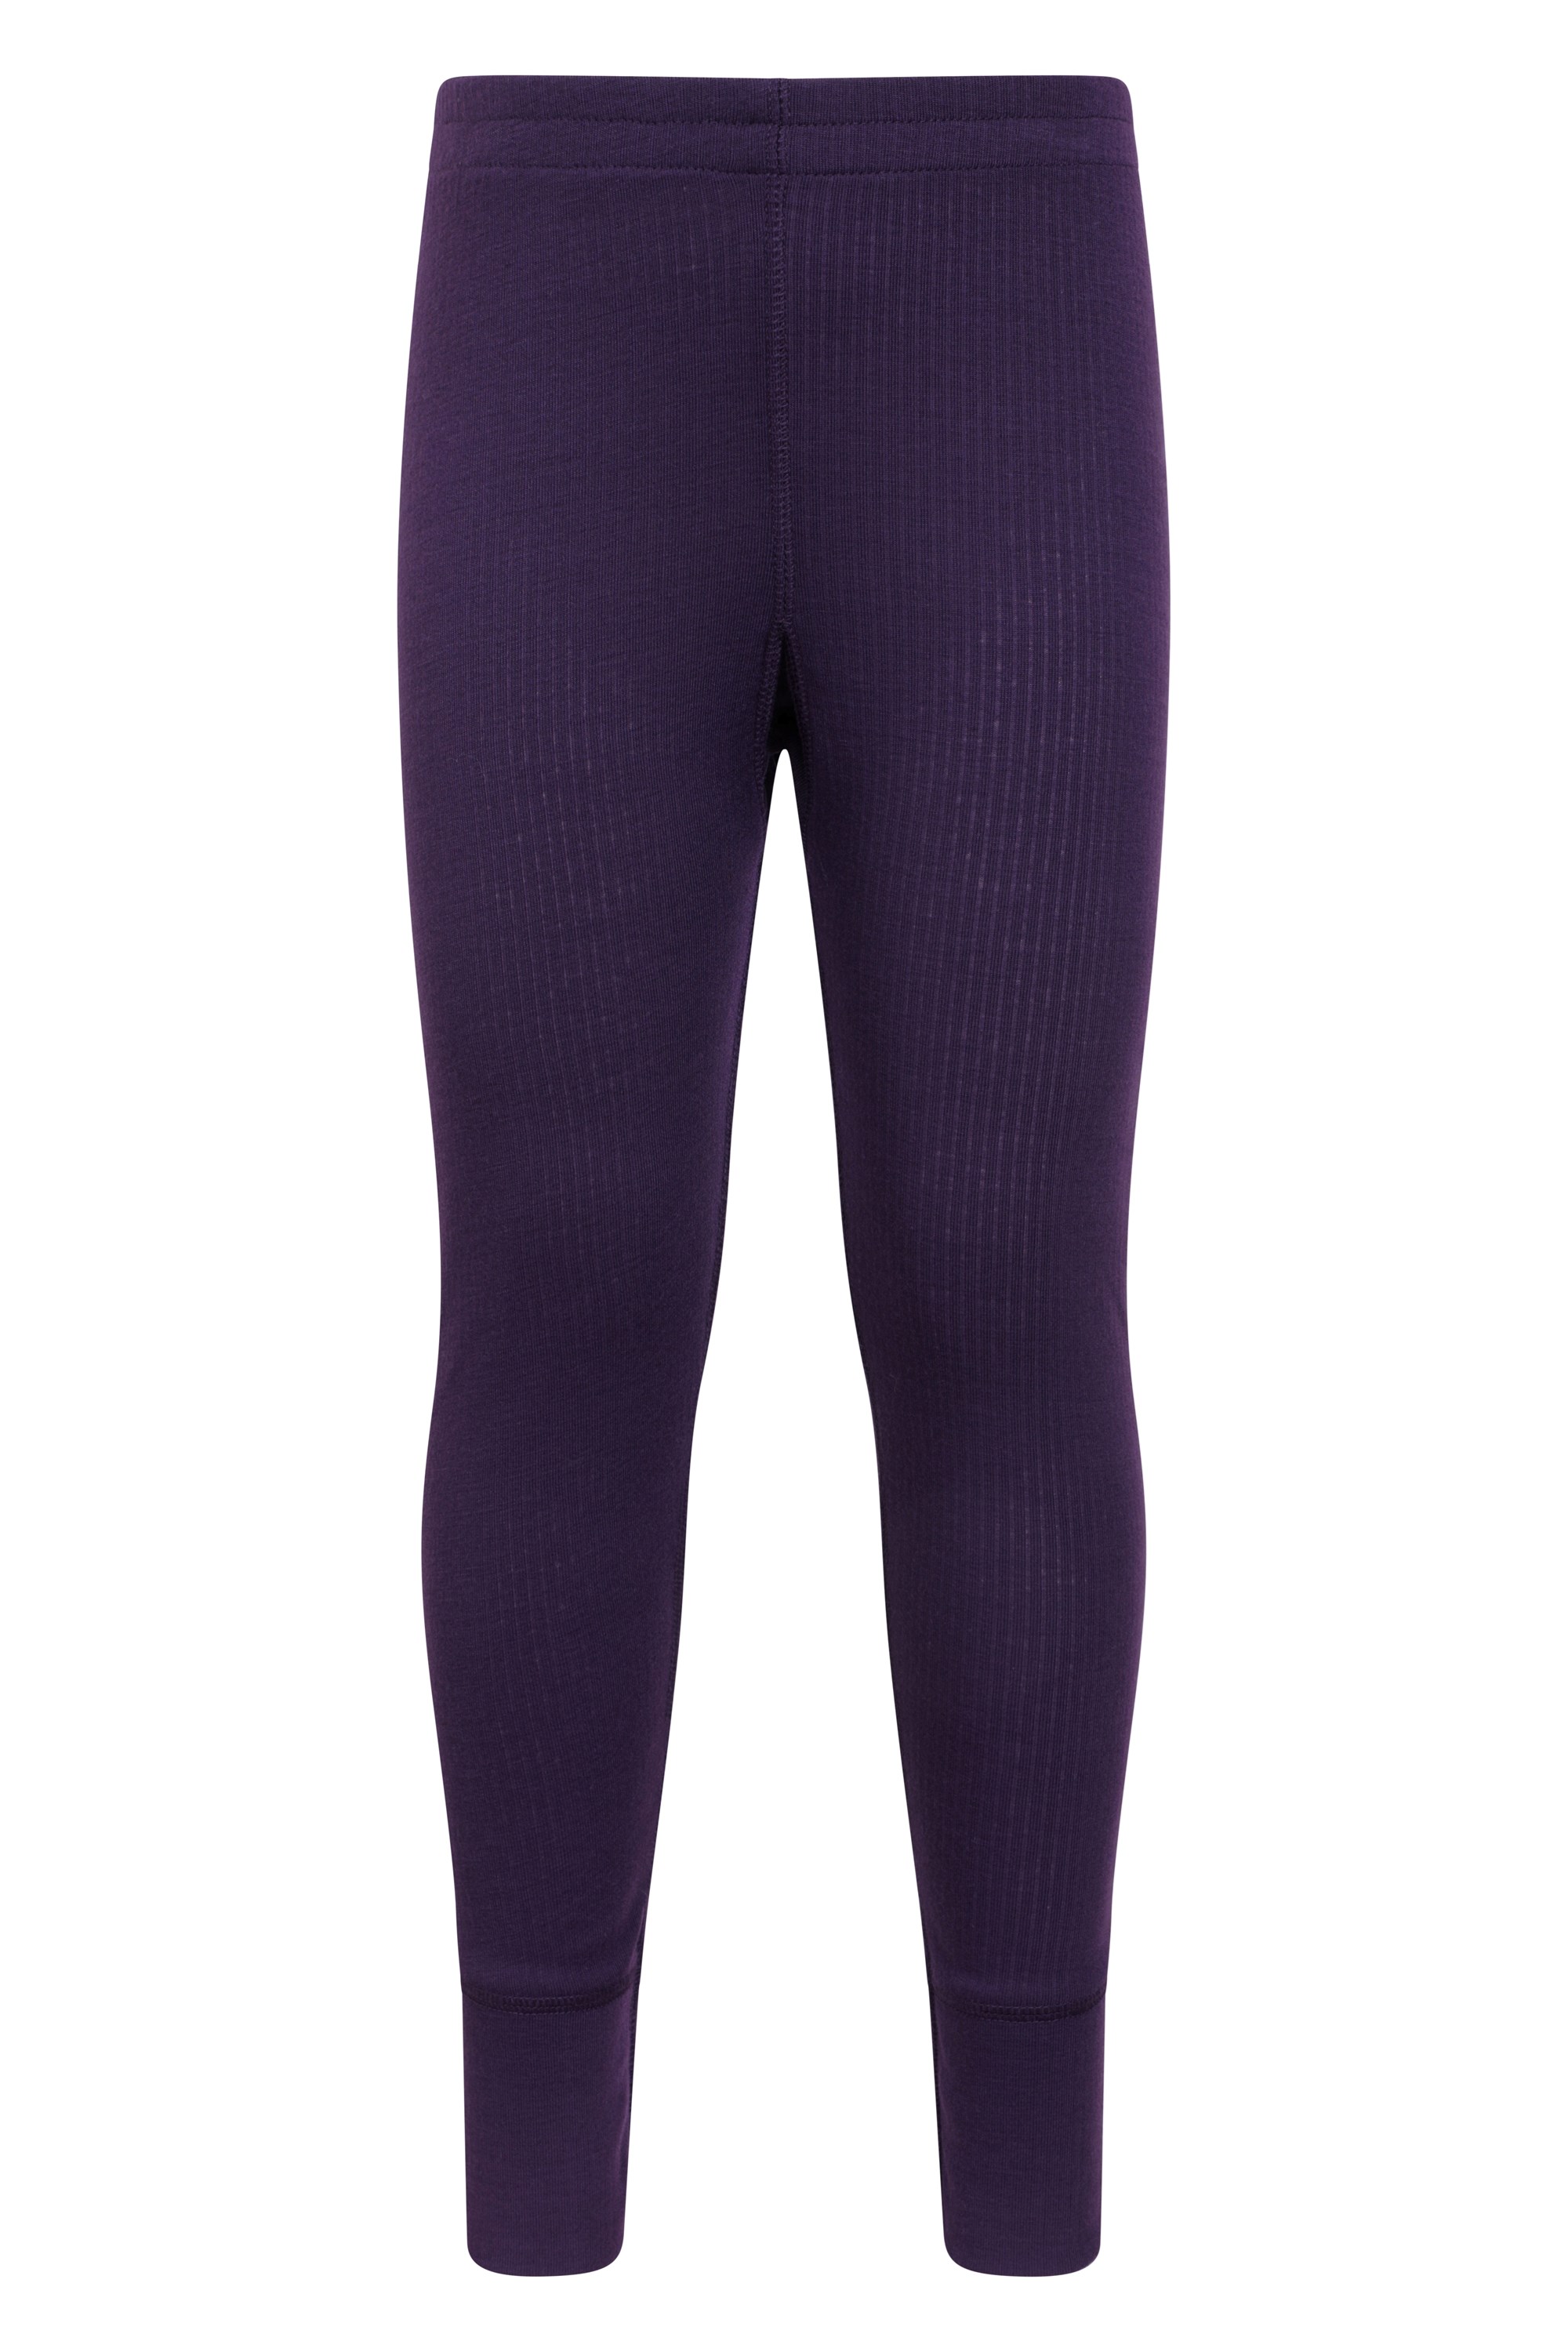 Elowel Thermal Underwear Set for Girls Kids Thermals Base Layer Small  Purple 